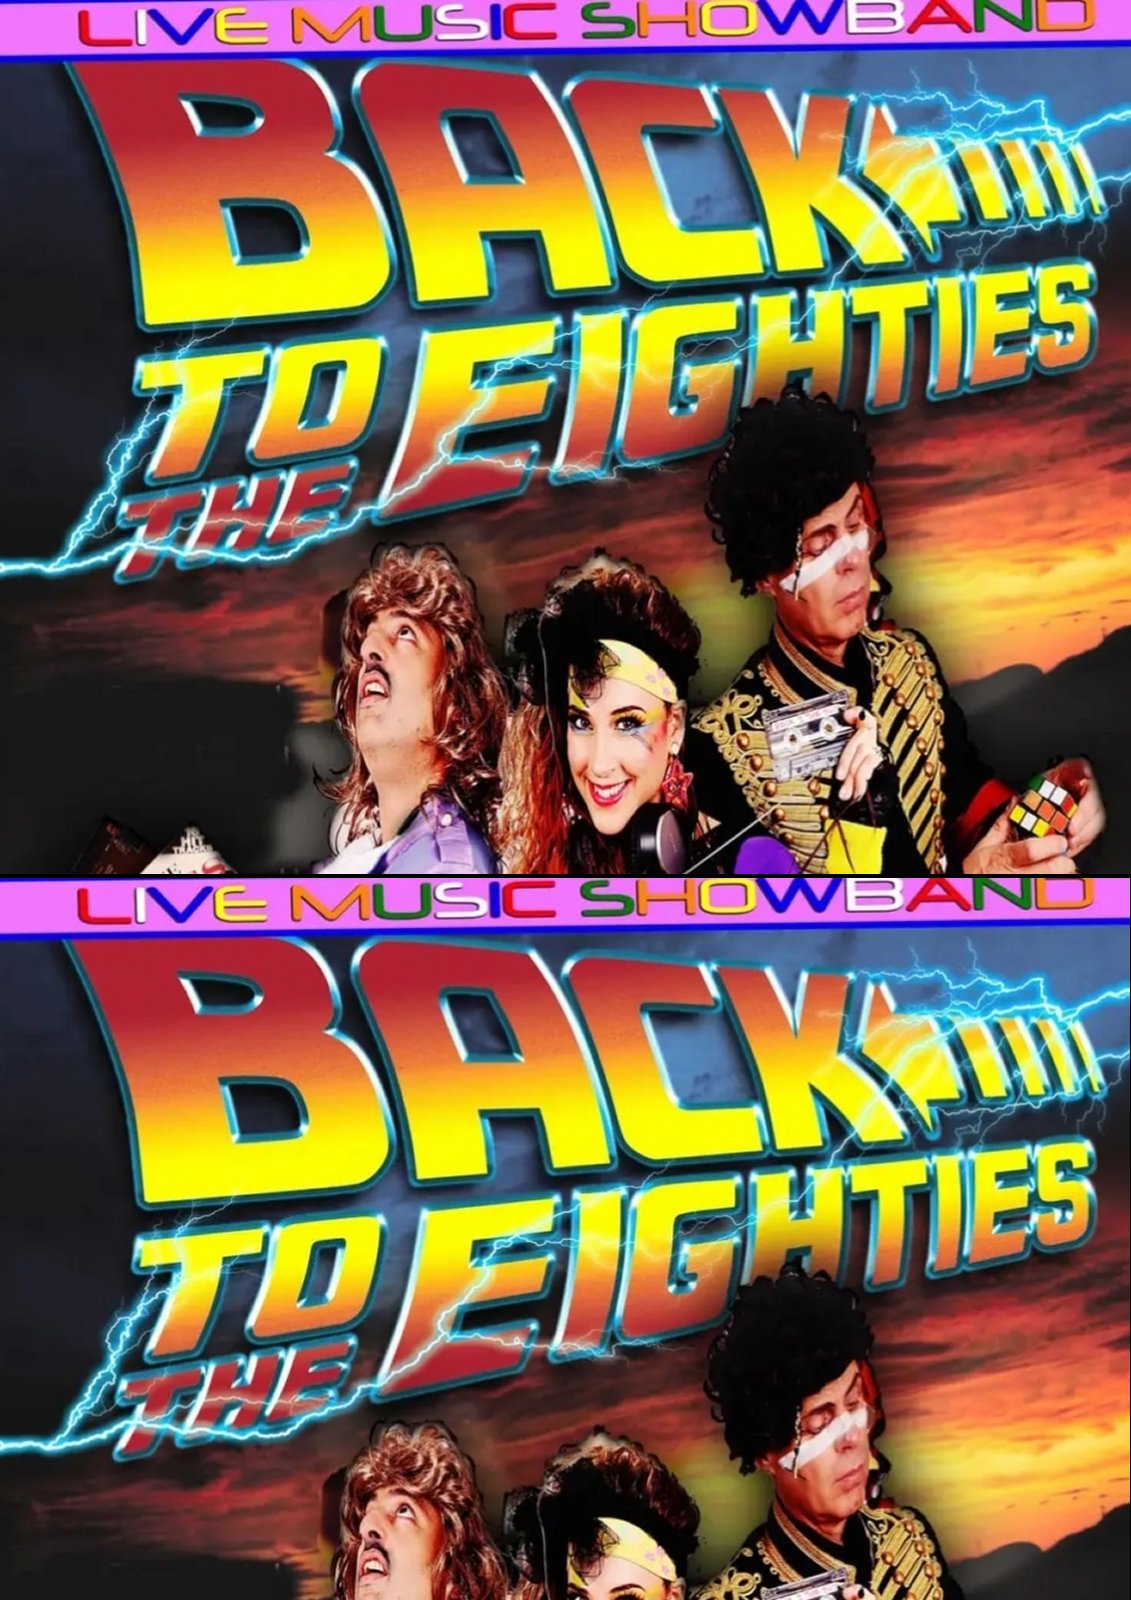 Back to the Eightes Live Band